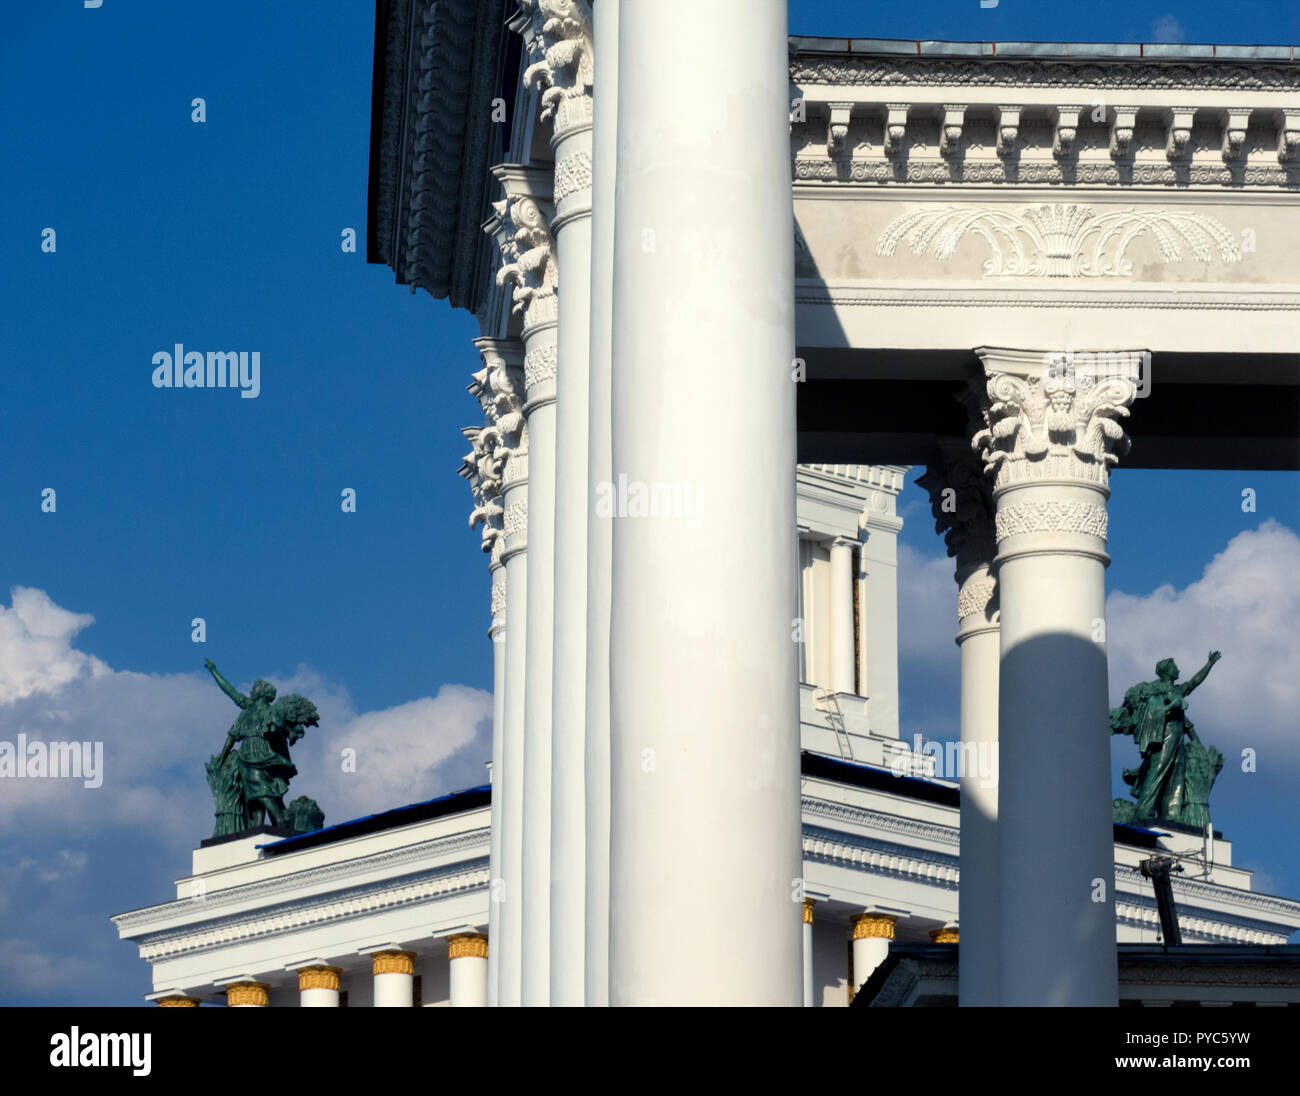 Details of classical building from Stalin era, columns and statues Stock Photo